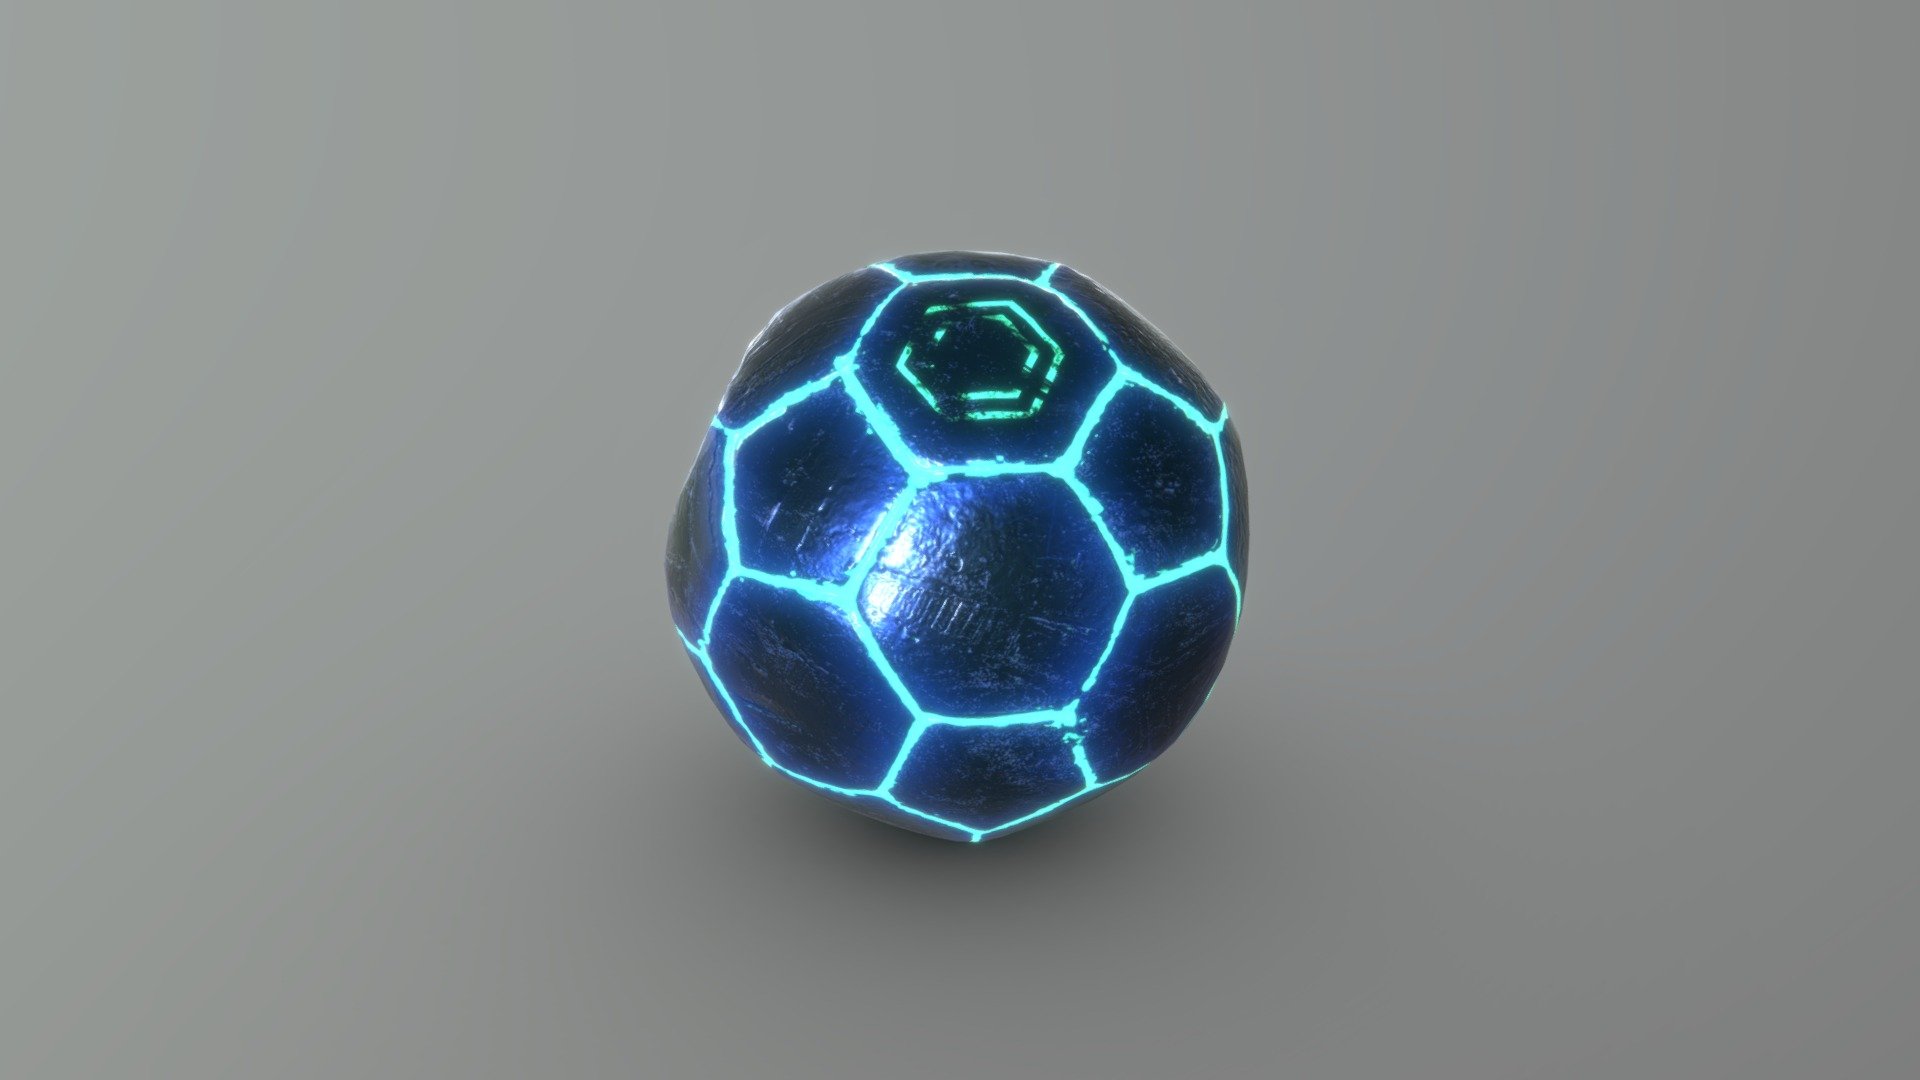 I created this soccerball durng a photogrammetry workshop at school.
 We used RealityCapture to create the mesh then used Houdini for retopology. In the end I used Xnormal for baking and I re-textured the model in Substance Painter. You can find the realistic textured model on my artstation : https://www.artstation.com/allieneyge ! - Soccer ball - Photogrammetry - Download Free 3D model by AllieNeyge (@Allie.Neyge) 3d model